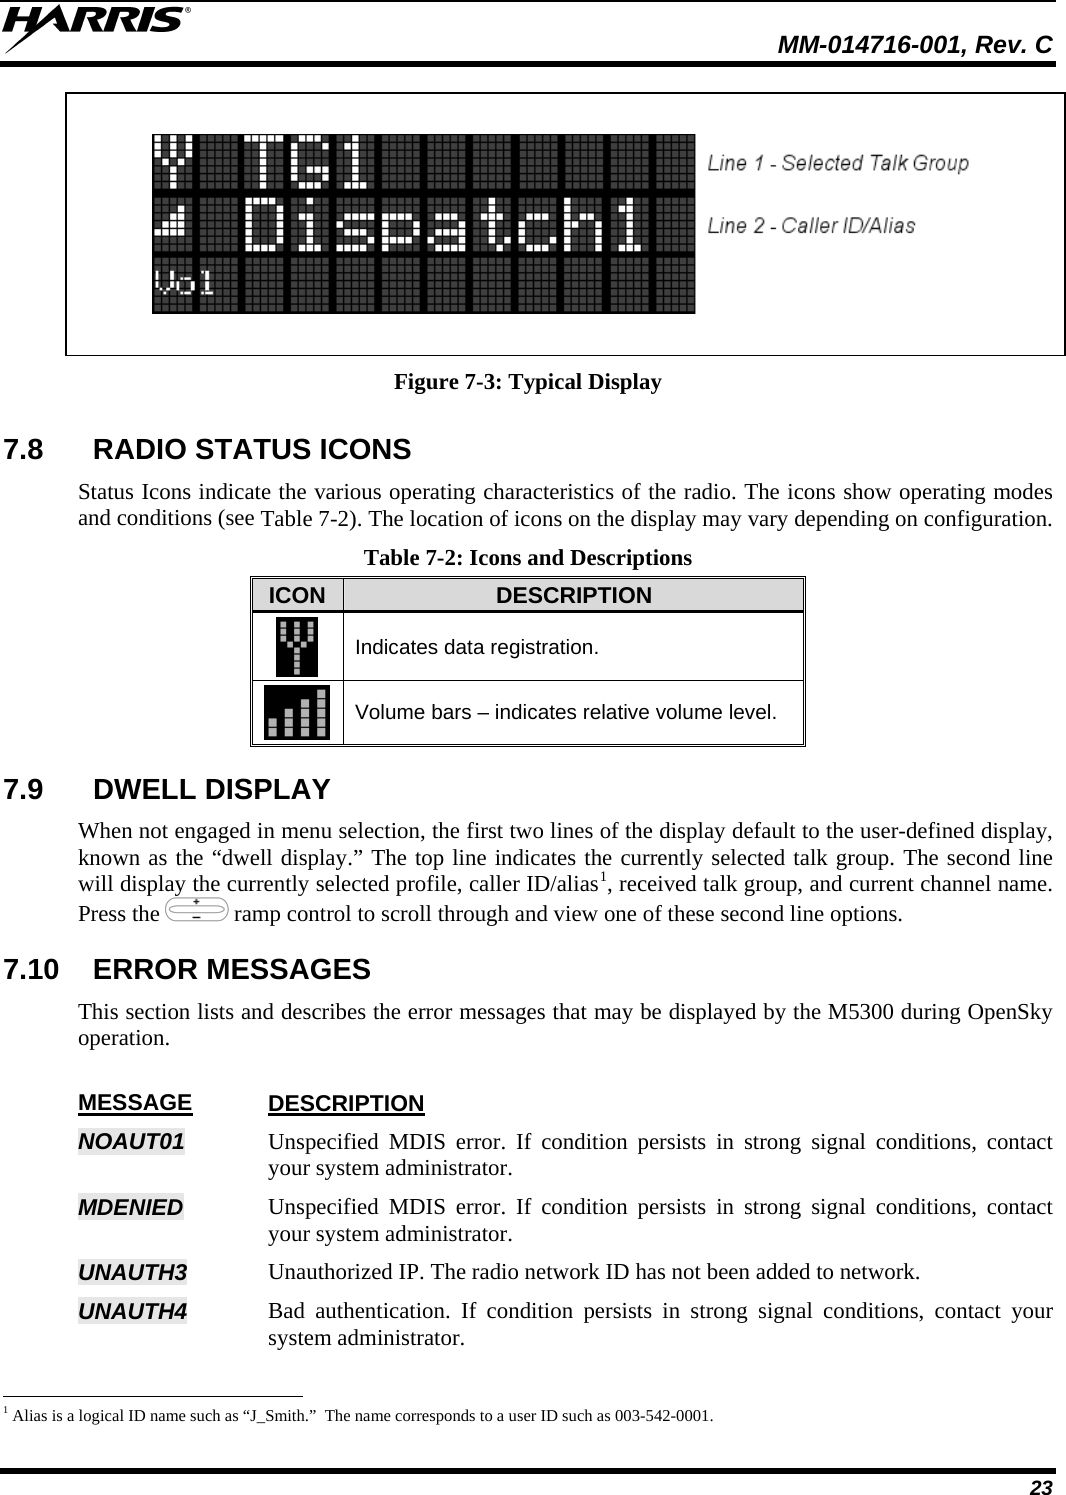  MM-014716-001, Rev. C 23    Figure 7-3: Typical Display 7.8  RADIO STATUS ICONS Status Icons indicate the various operating characteristics of the radio. The icons show operating modes and conditions (see Table 7-2). The location of icons on the display may vary depending on configuration. Table 7-2: Icons and Descriptions ICON  DESCRIPTION  Indicates data registration.  Volume bars – indicates relative volume level. 7.9 DWELL DISPLAY When not engaged in menu selection, the first two lines of the display default to the user-defined display, known as the “dwell display.” The top line indicates the currently selected talk group. The second line will display the currently selected profile, caller ID/alias1, received talk group, and current channel name. Press the   ramp control to scroll through and view one of these second line options.  7.10 ERROR MESSAGES This section lists and describes the error messages that may be displayed by the M5300 during OpenSky operation.  MESSAGE DESCRIPTION NOAUT01  Unspecified MDIS error. If condition persists in strong signal conditions, contact your system administrator. MDENIED   Unspecified MDIS error. If condition persists in strong signal conditions, contact your system administrator. UNAUTH3  Unauthorized IP. The radio network ID has not been added to network. UNAUTH4  Bad authentication. If condition persists in strong signal conditions, contact your system administrator.                                                            1 Alias is a logical ID name such as “J_Smith.”  The name corresponds to a user ID such as 003-542-0001. 